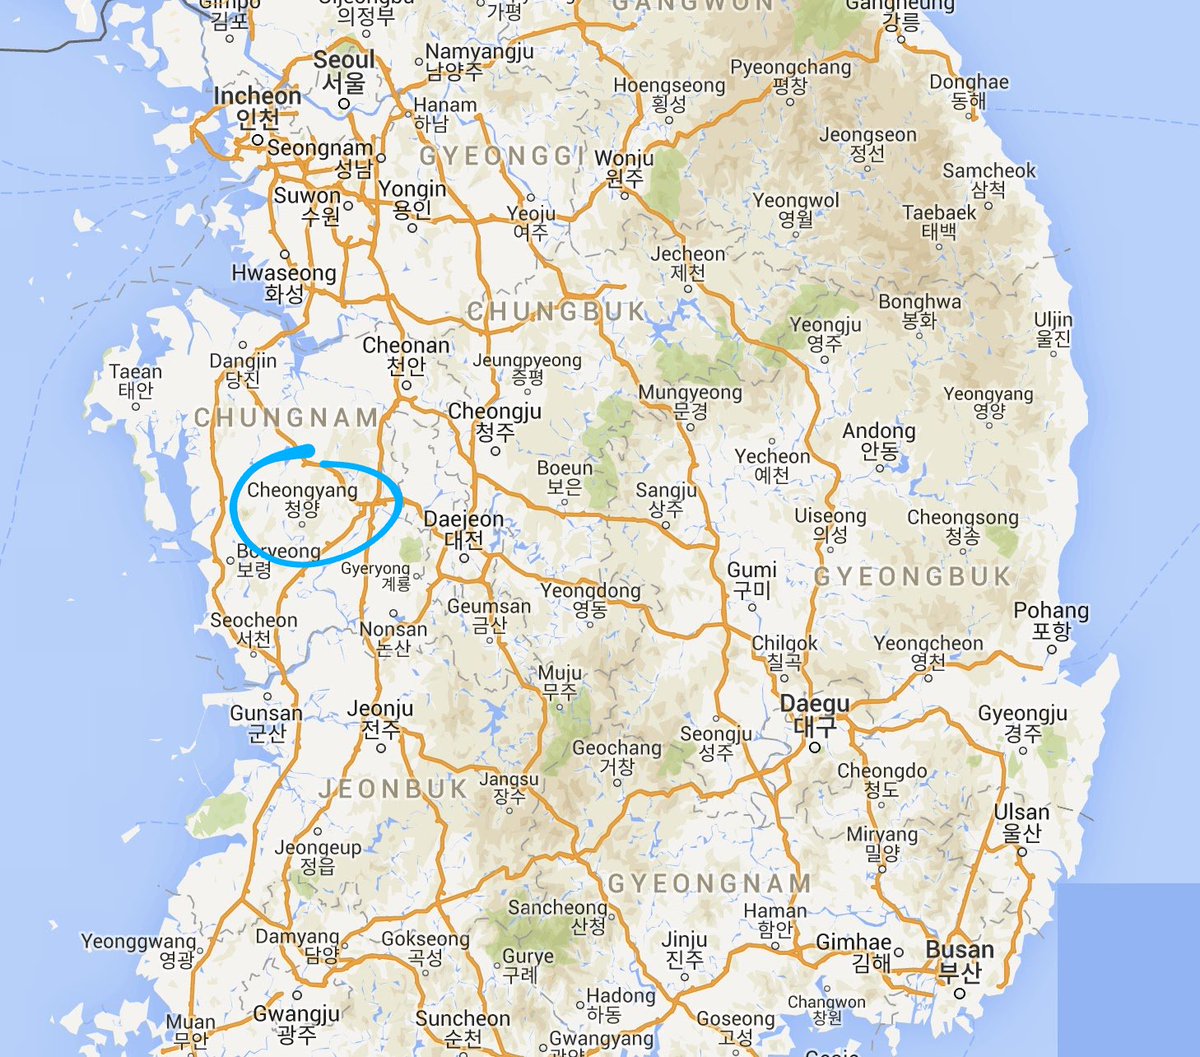 Cheongyang county in Chungcheong province, however, had other ideas. The county funded research projects to "prove" the true origins of cheongyang. "While no clear records indicate this, it is definitely the variety taken from Cheongyang."  https://biz.chosun.com/site/data/html_dir/2007/04/05/2007040500987.html